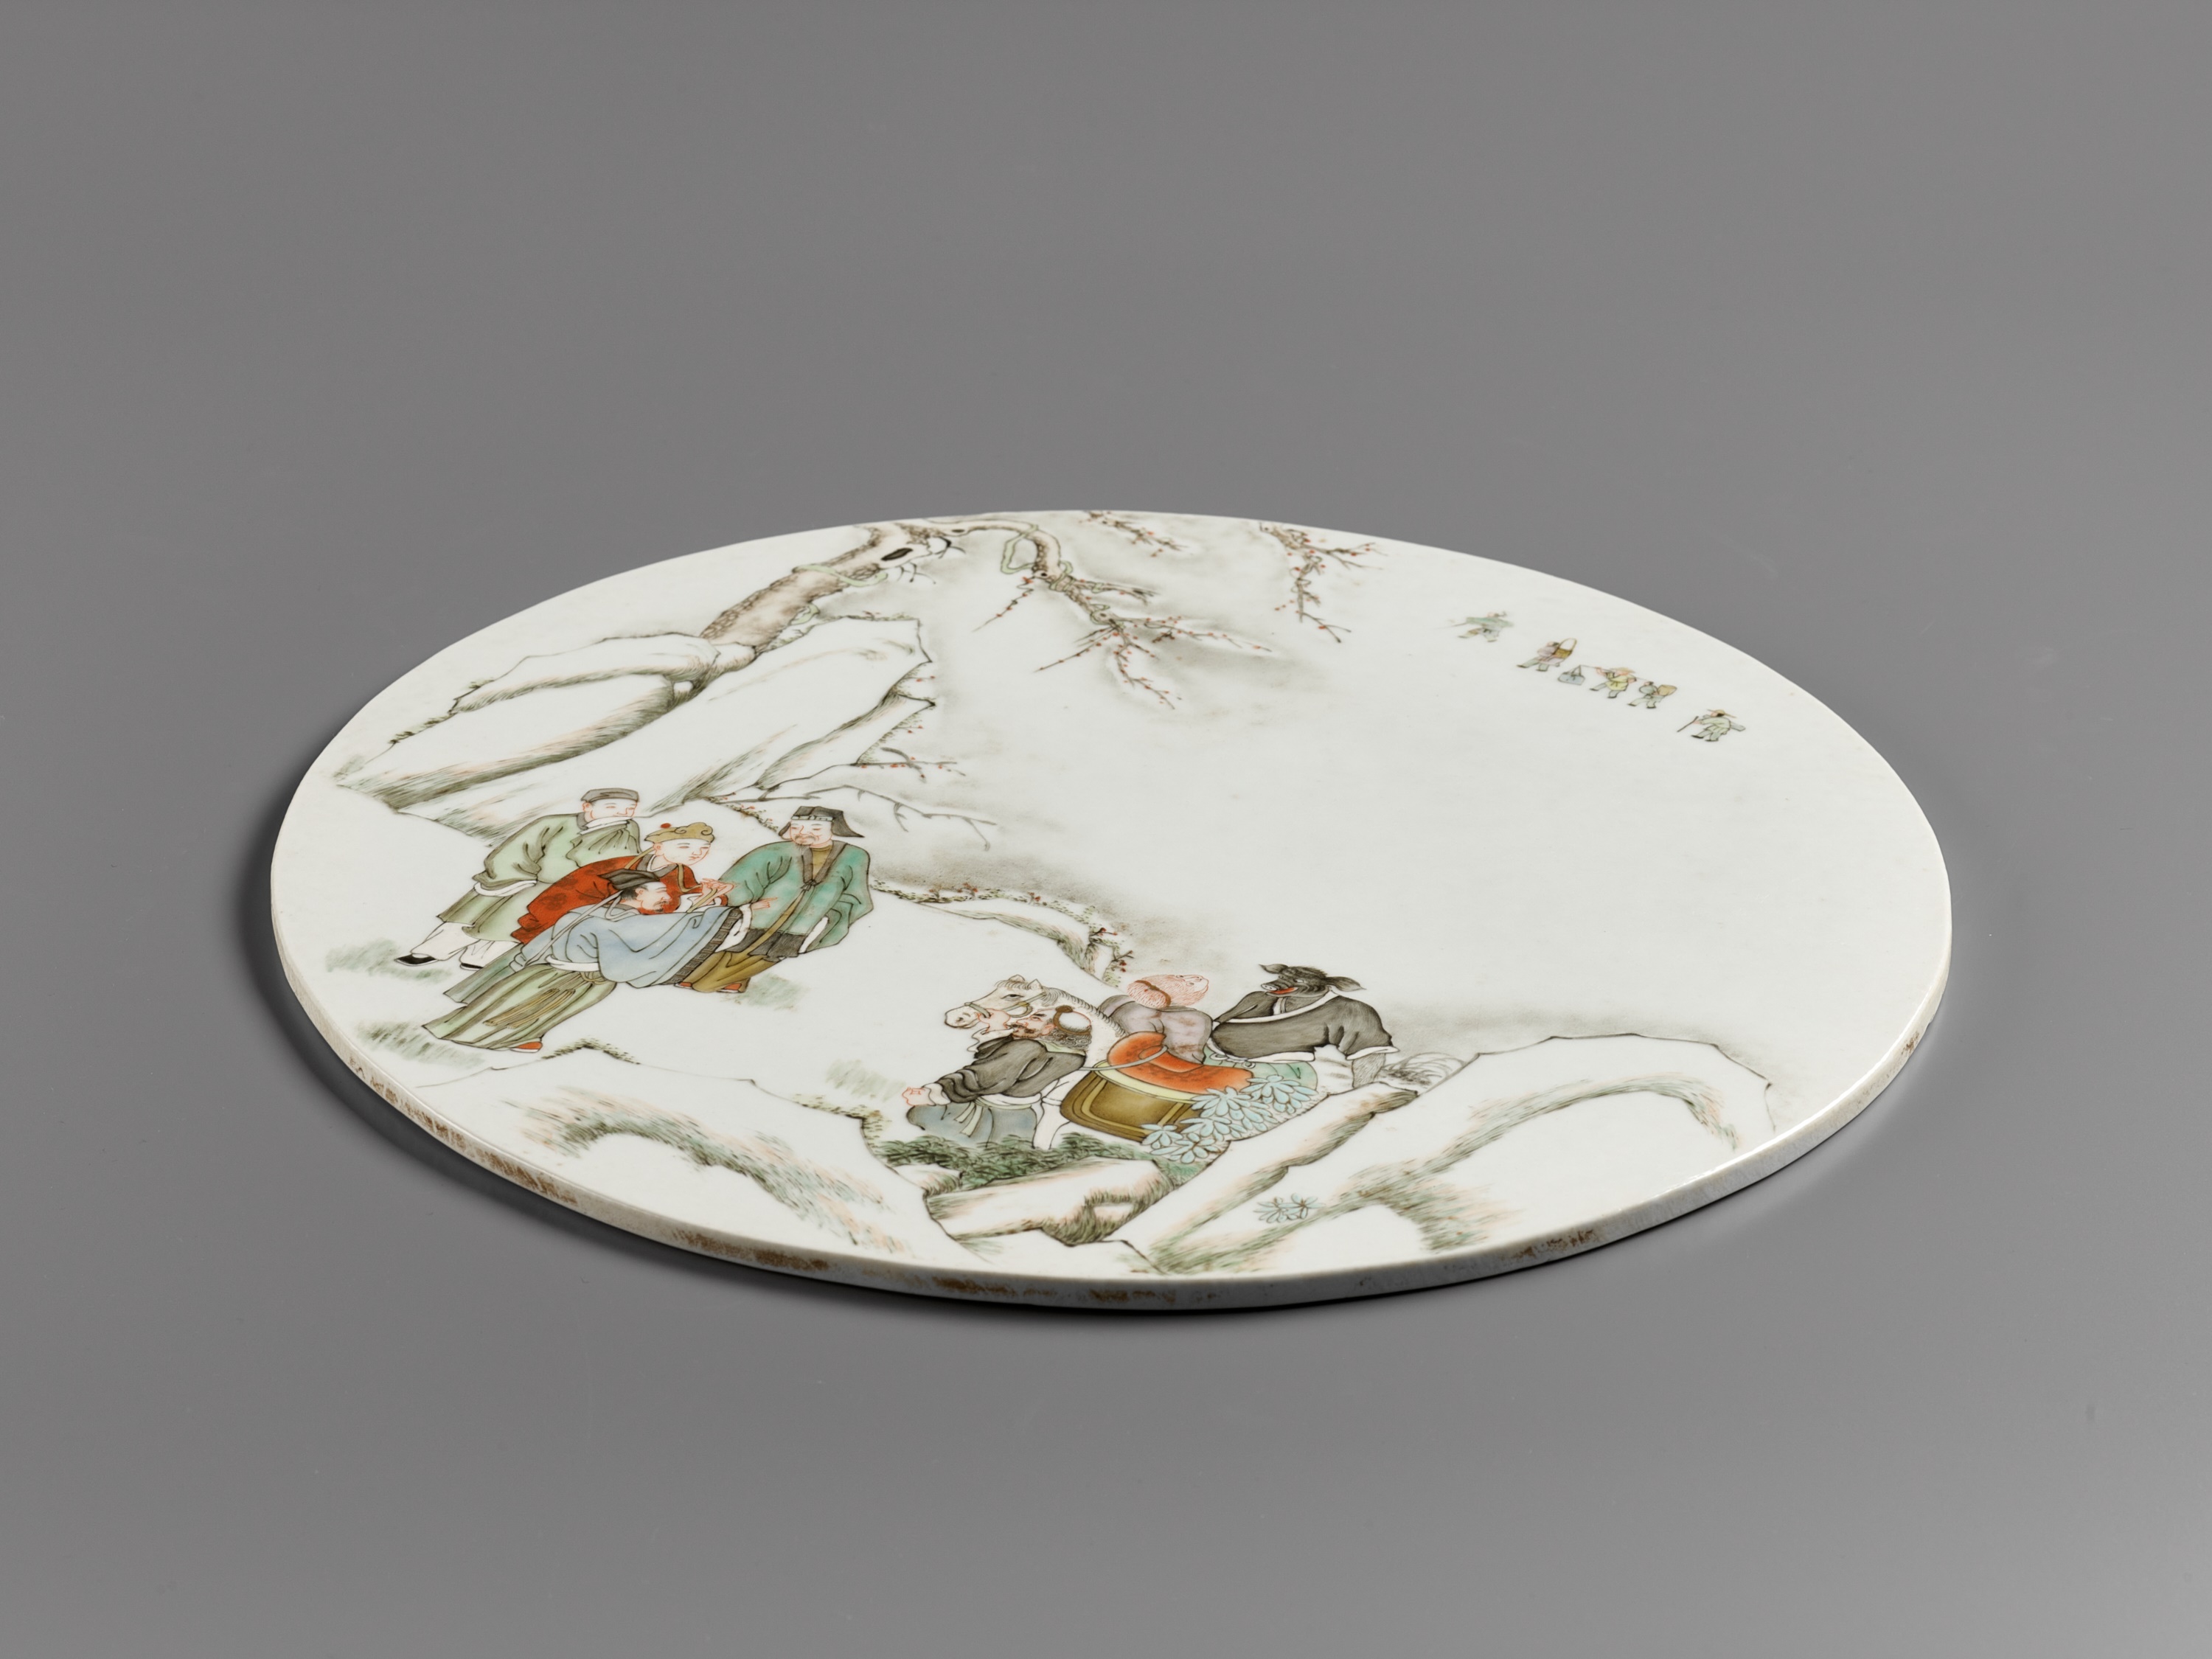 A FINELY DETAILED 'JOURNEY TO THE WEST' FAMILLE ROSE PORCELAIN PLAQUE, QING DYNASTY - Image 6 of 7